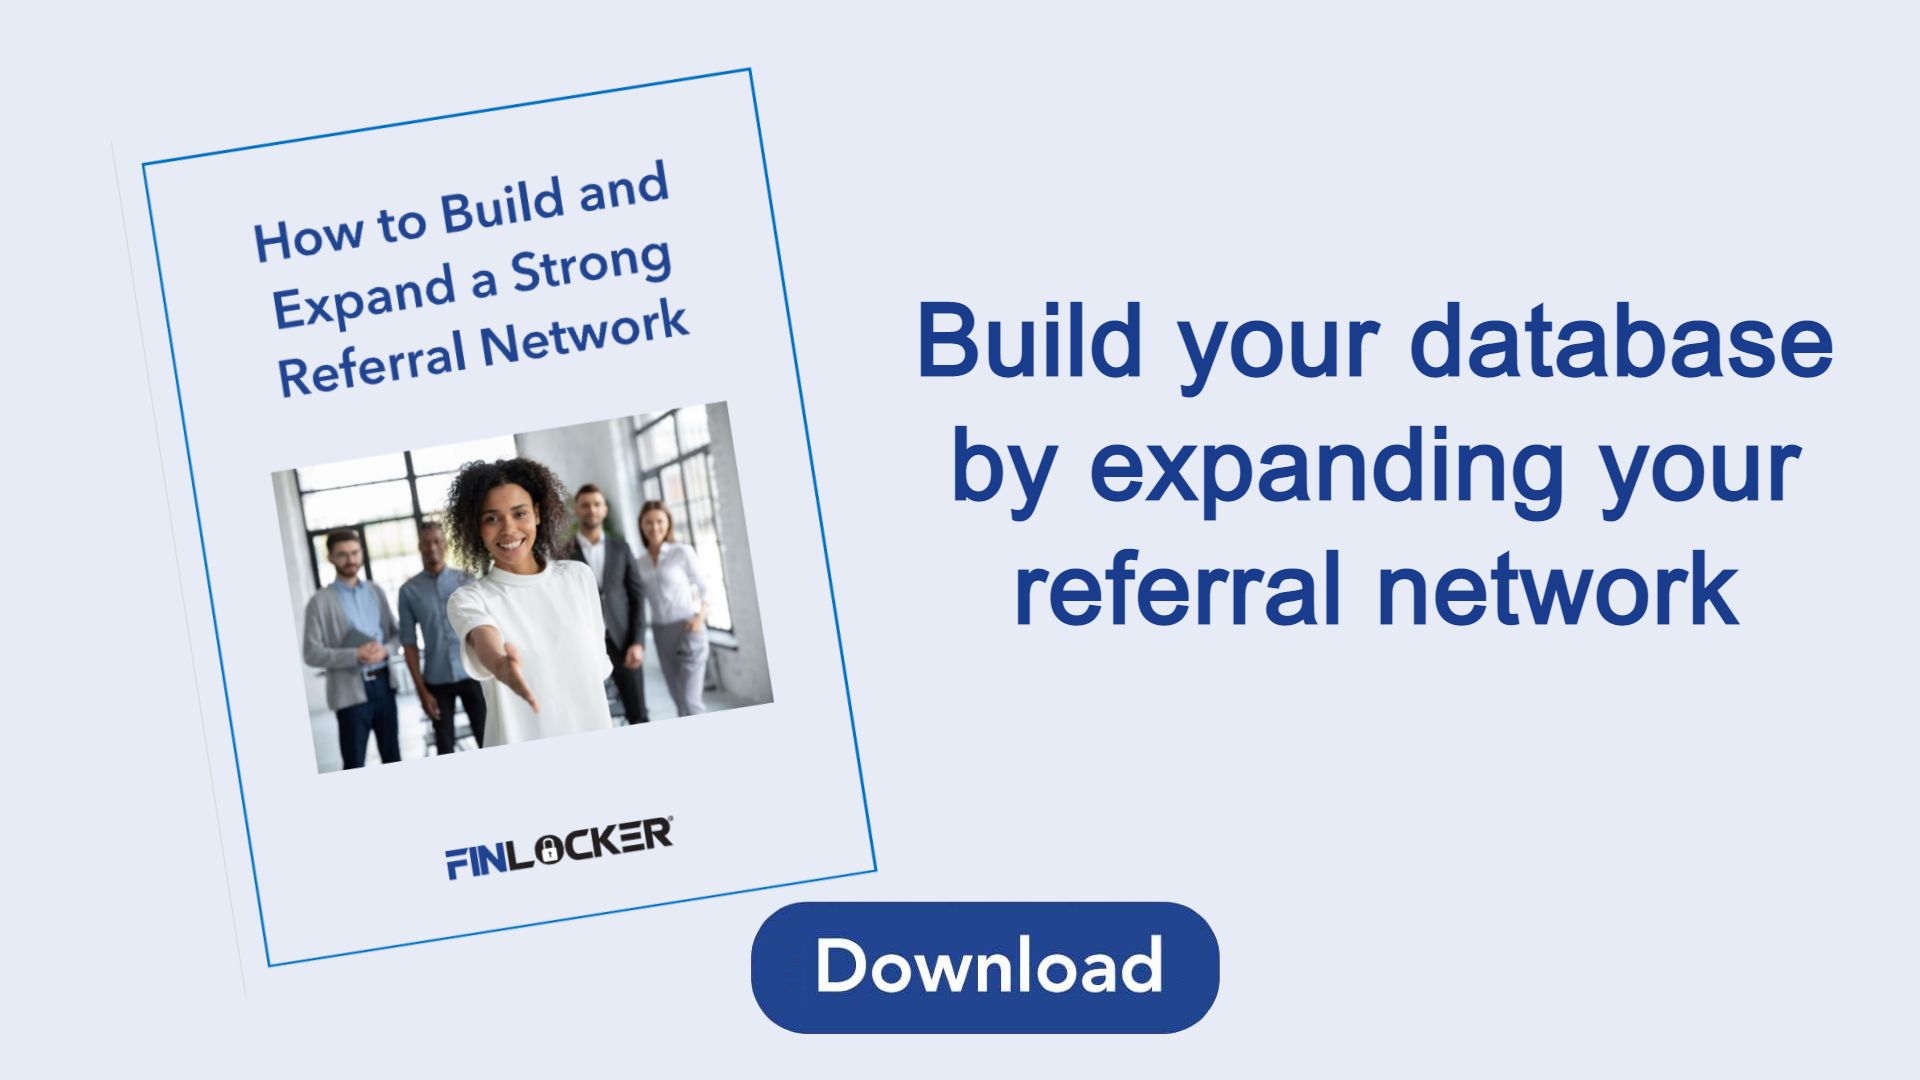 Download research paper, How to Build and Expand a Strong Referral Network